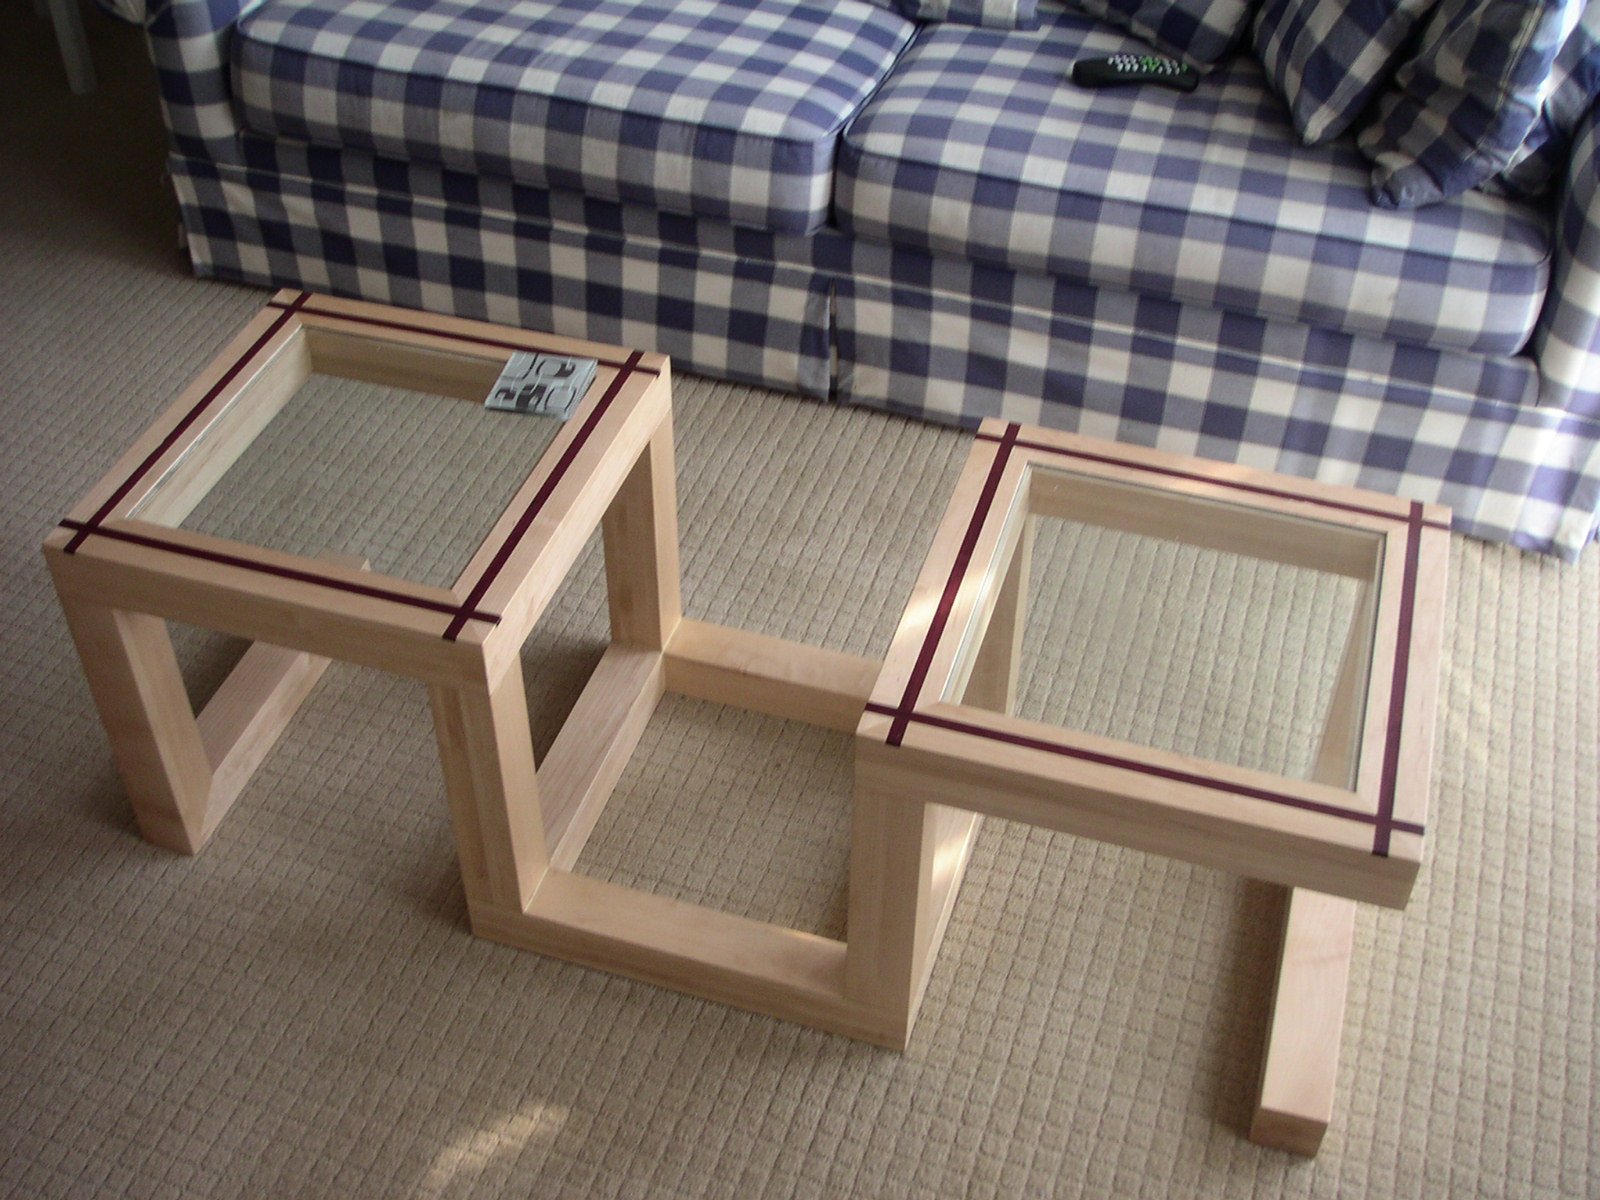 Cool Wood Projects